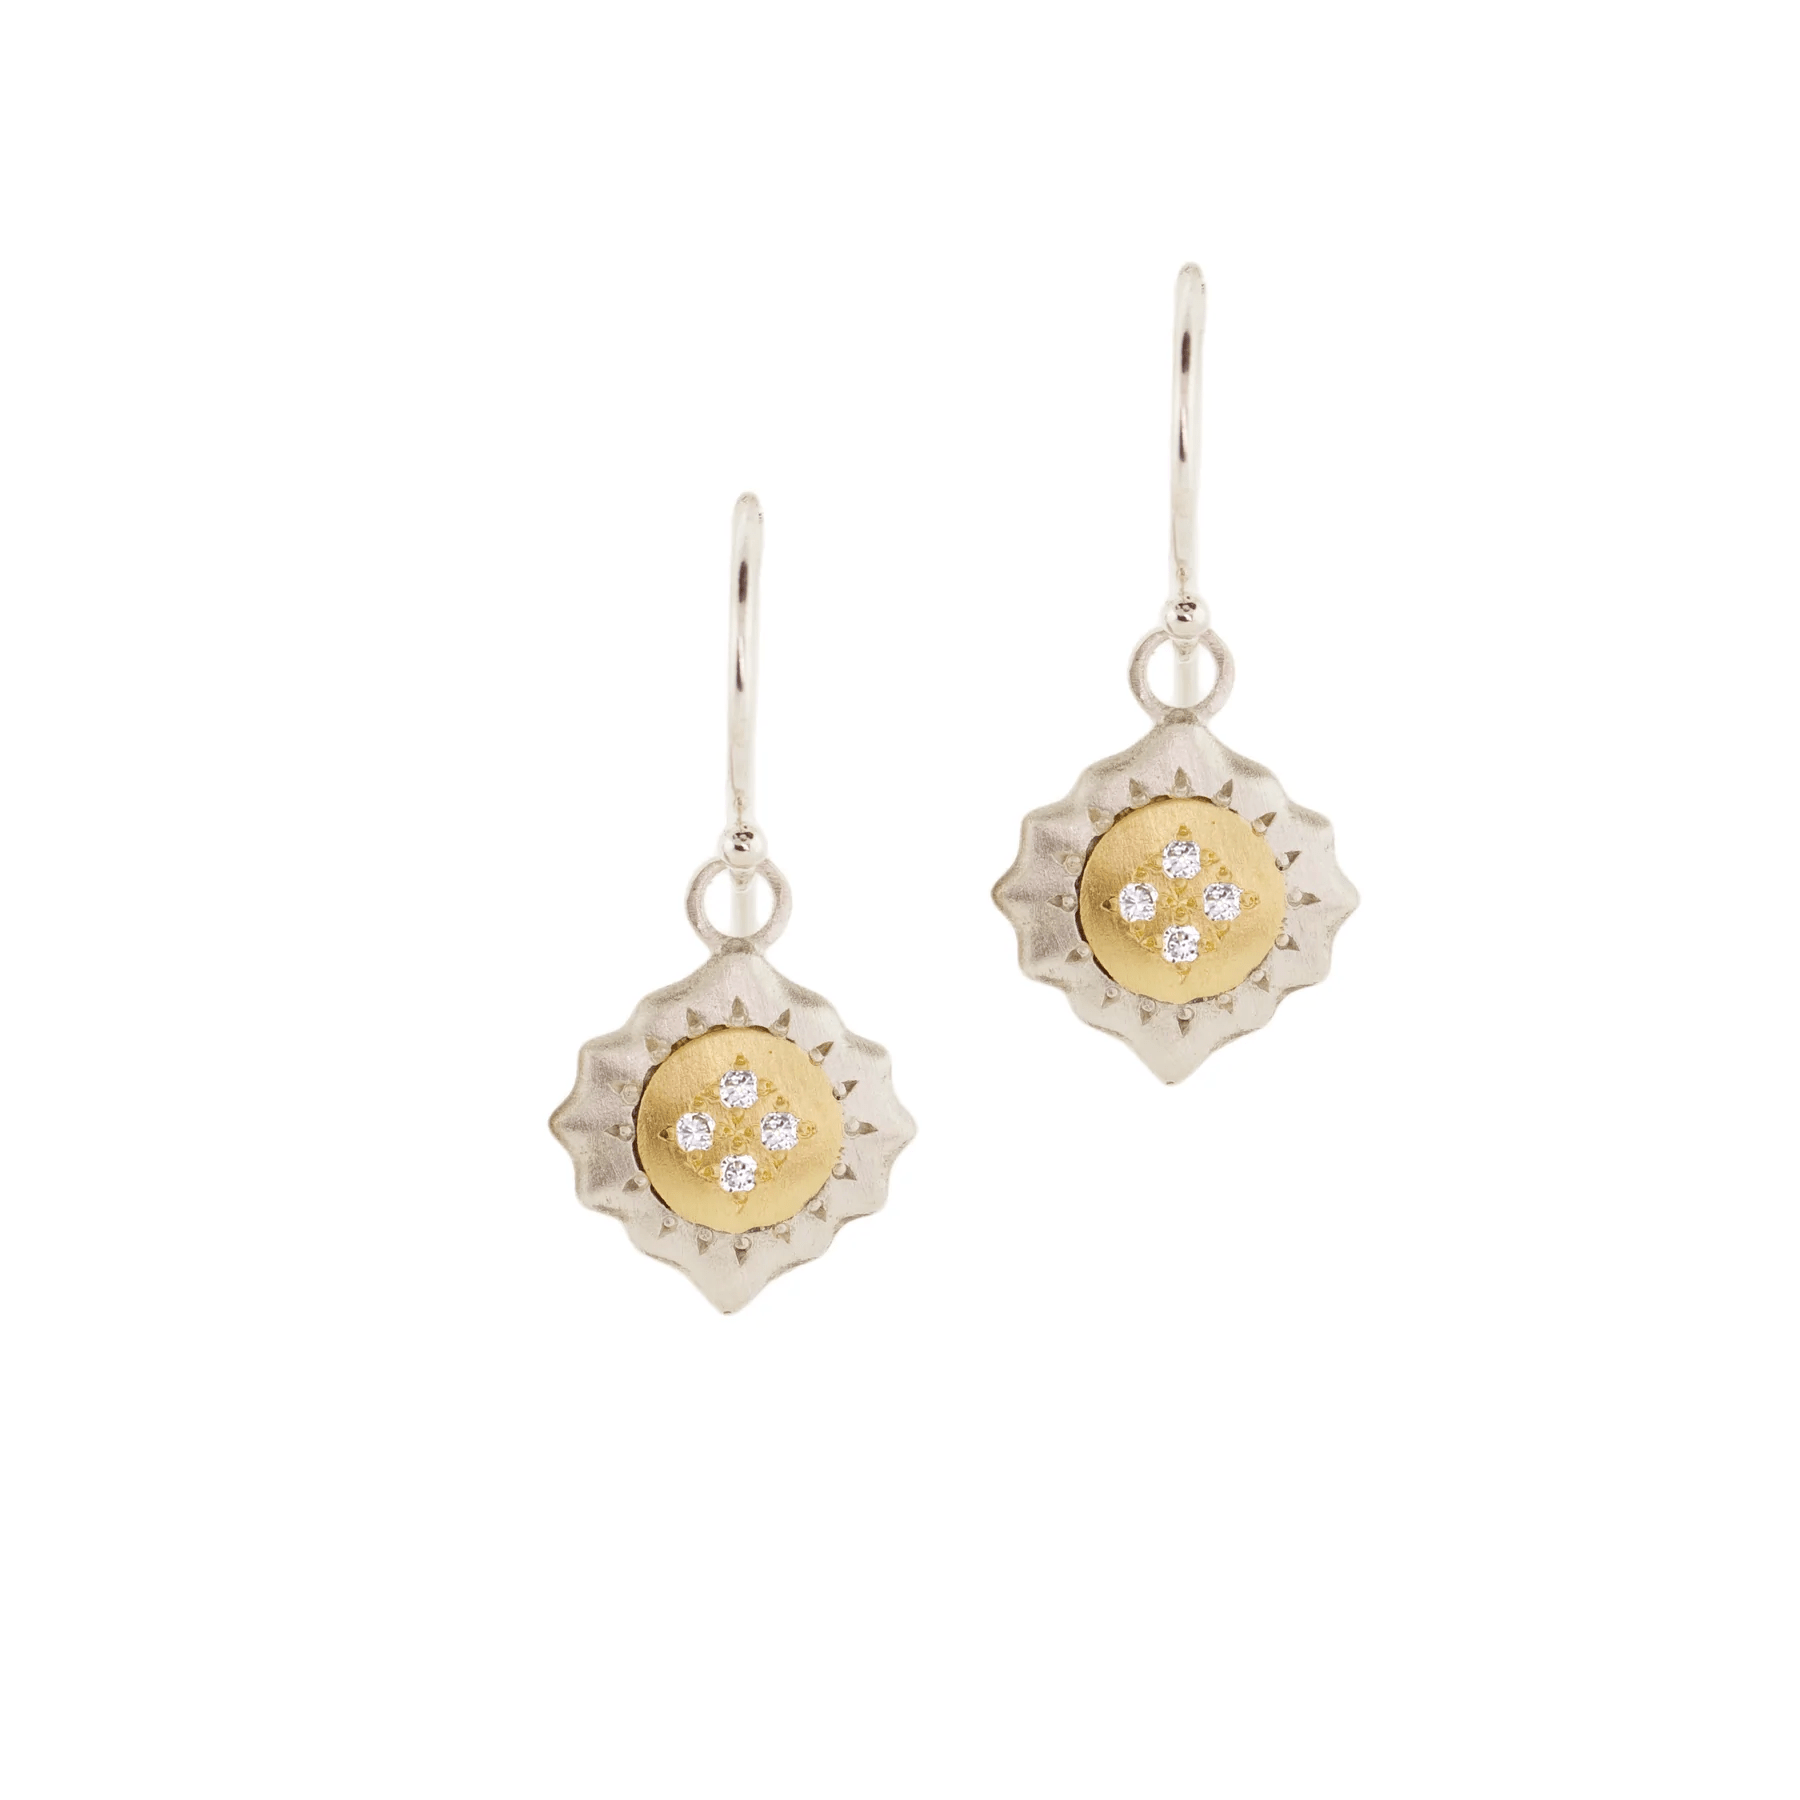 Sterling Silver and 18K Yellow Gold Diamond Drop Earrings, Sterling Silver and 18K Yellow Gold Diamond Drop Earrings, Long's Jewelers